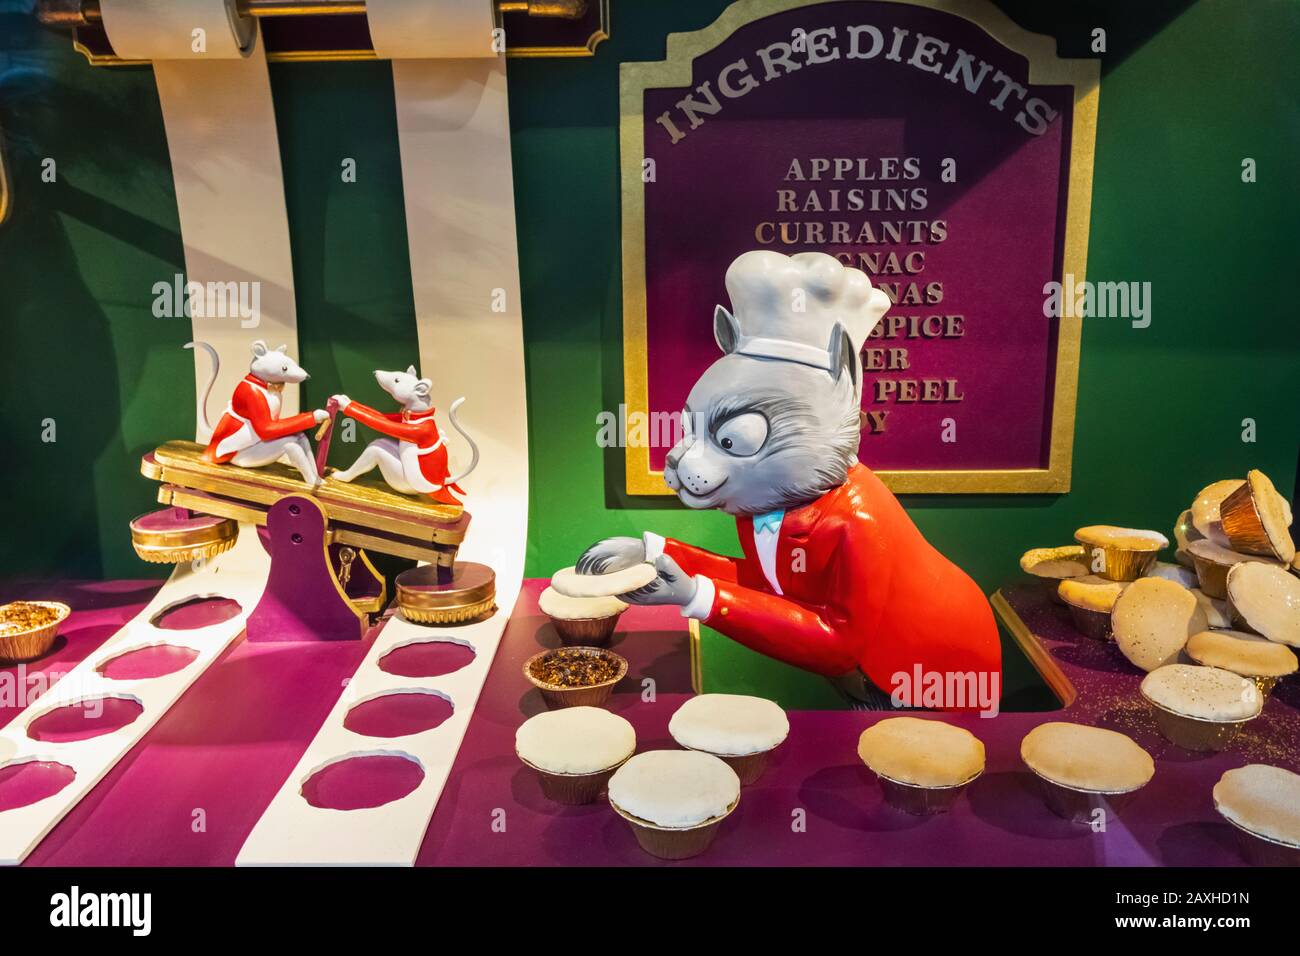 England, London, Piccadilly, Fortnum and Mason Store, Funny and Amusing Christmas Window Display of Cat and Mice Making Traditional English Mince Pies Stock Photo